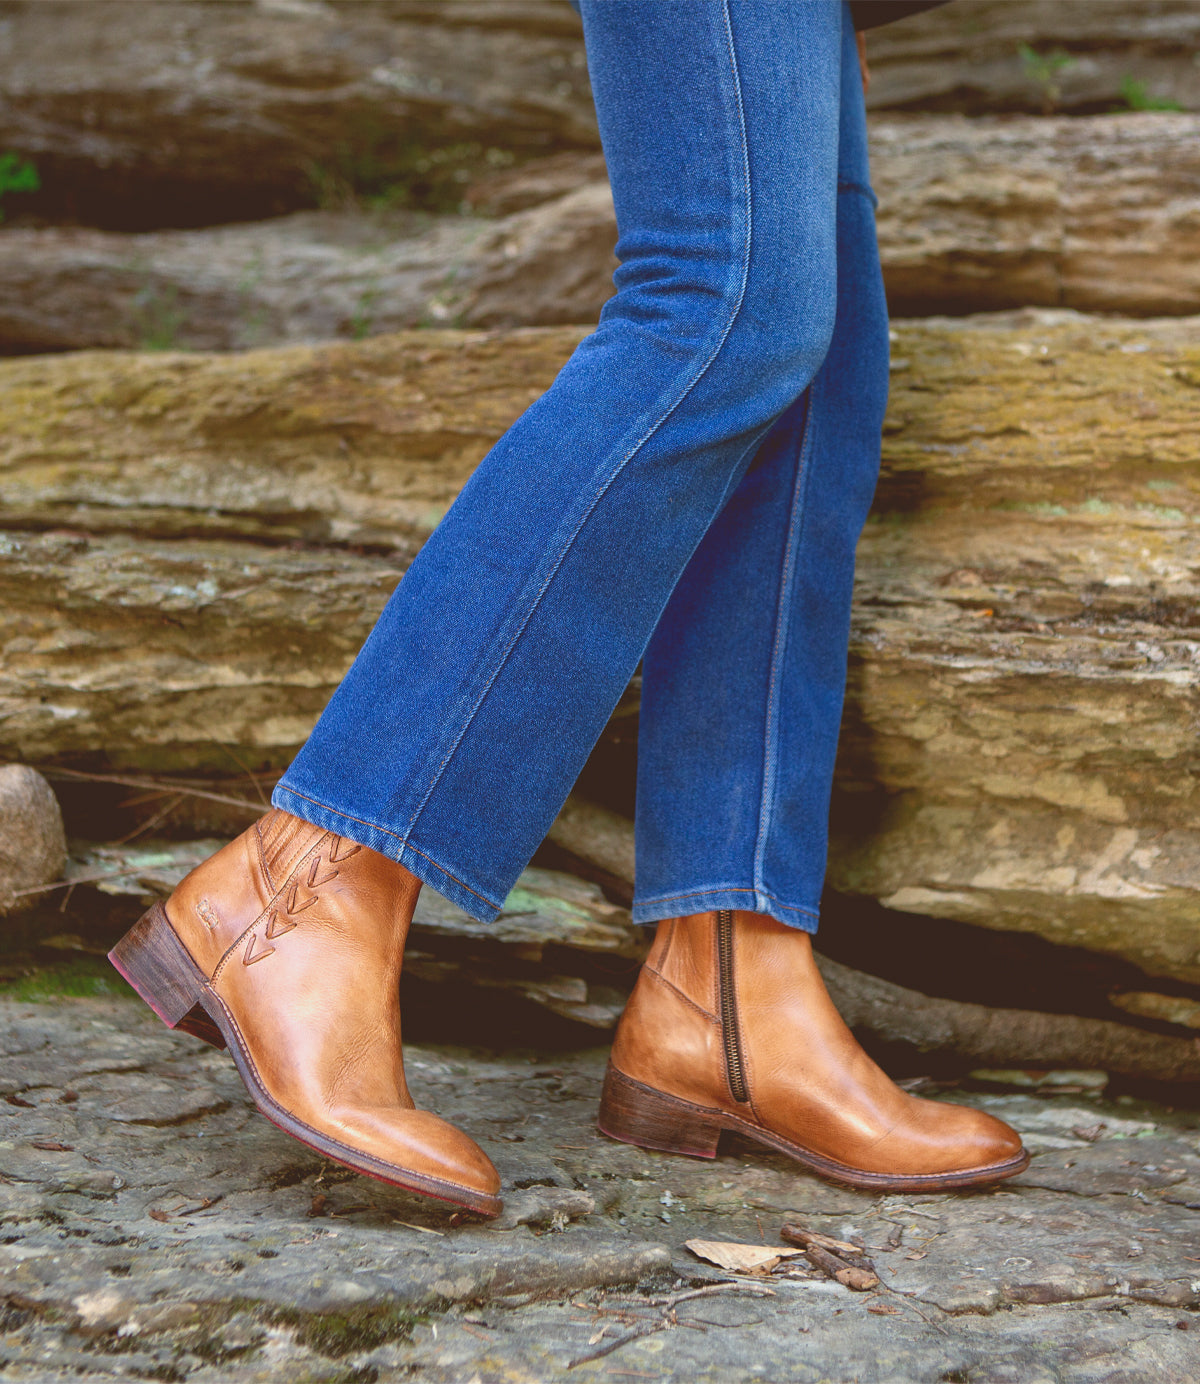 A woman wearing Bed Stu Alina denim jeans and Bed Stu leather ankle boots standing on a rock.